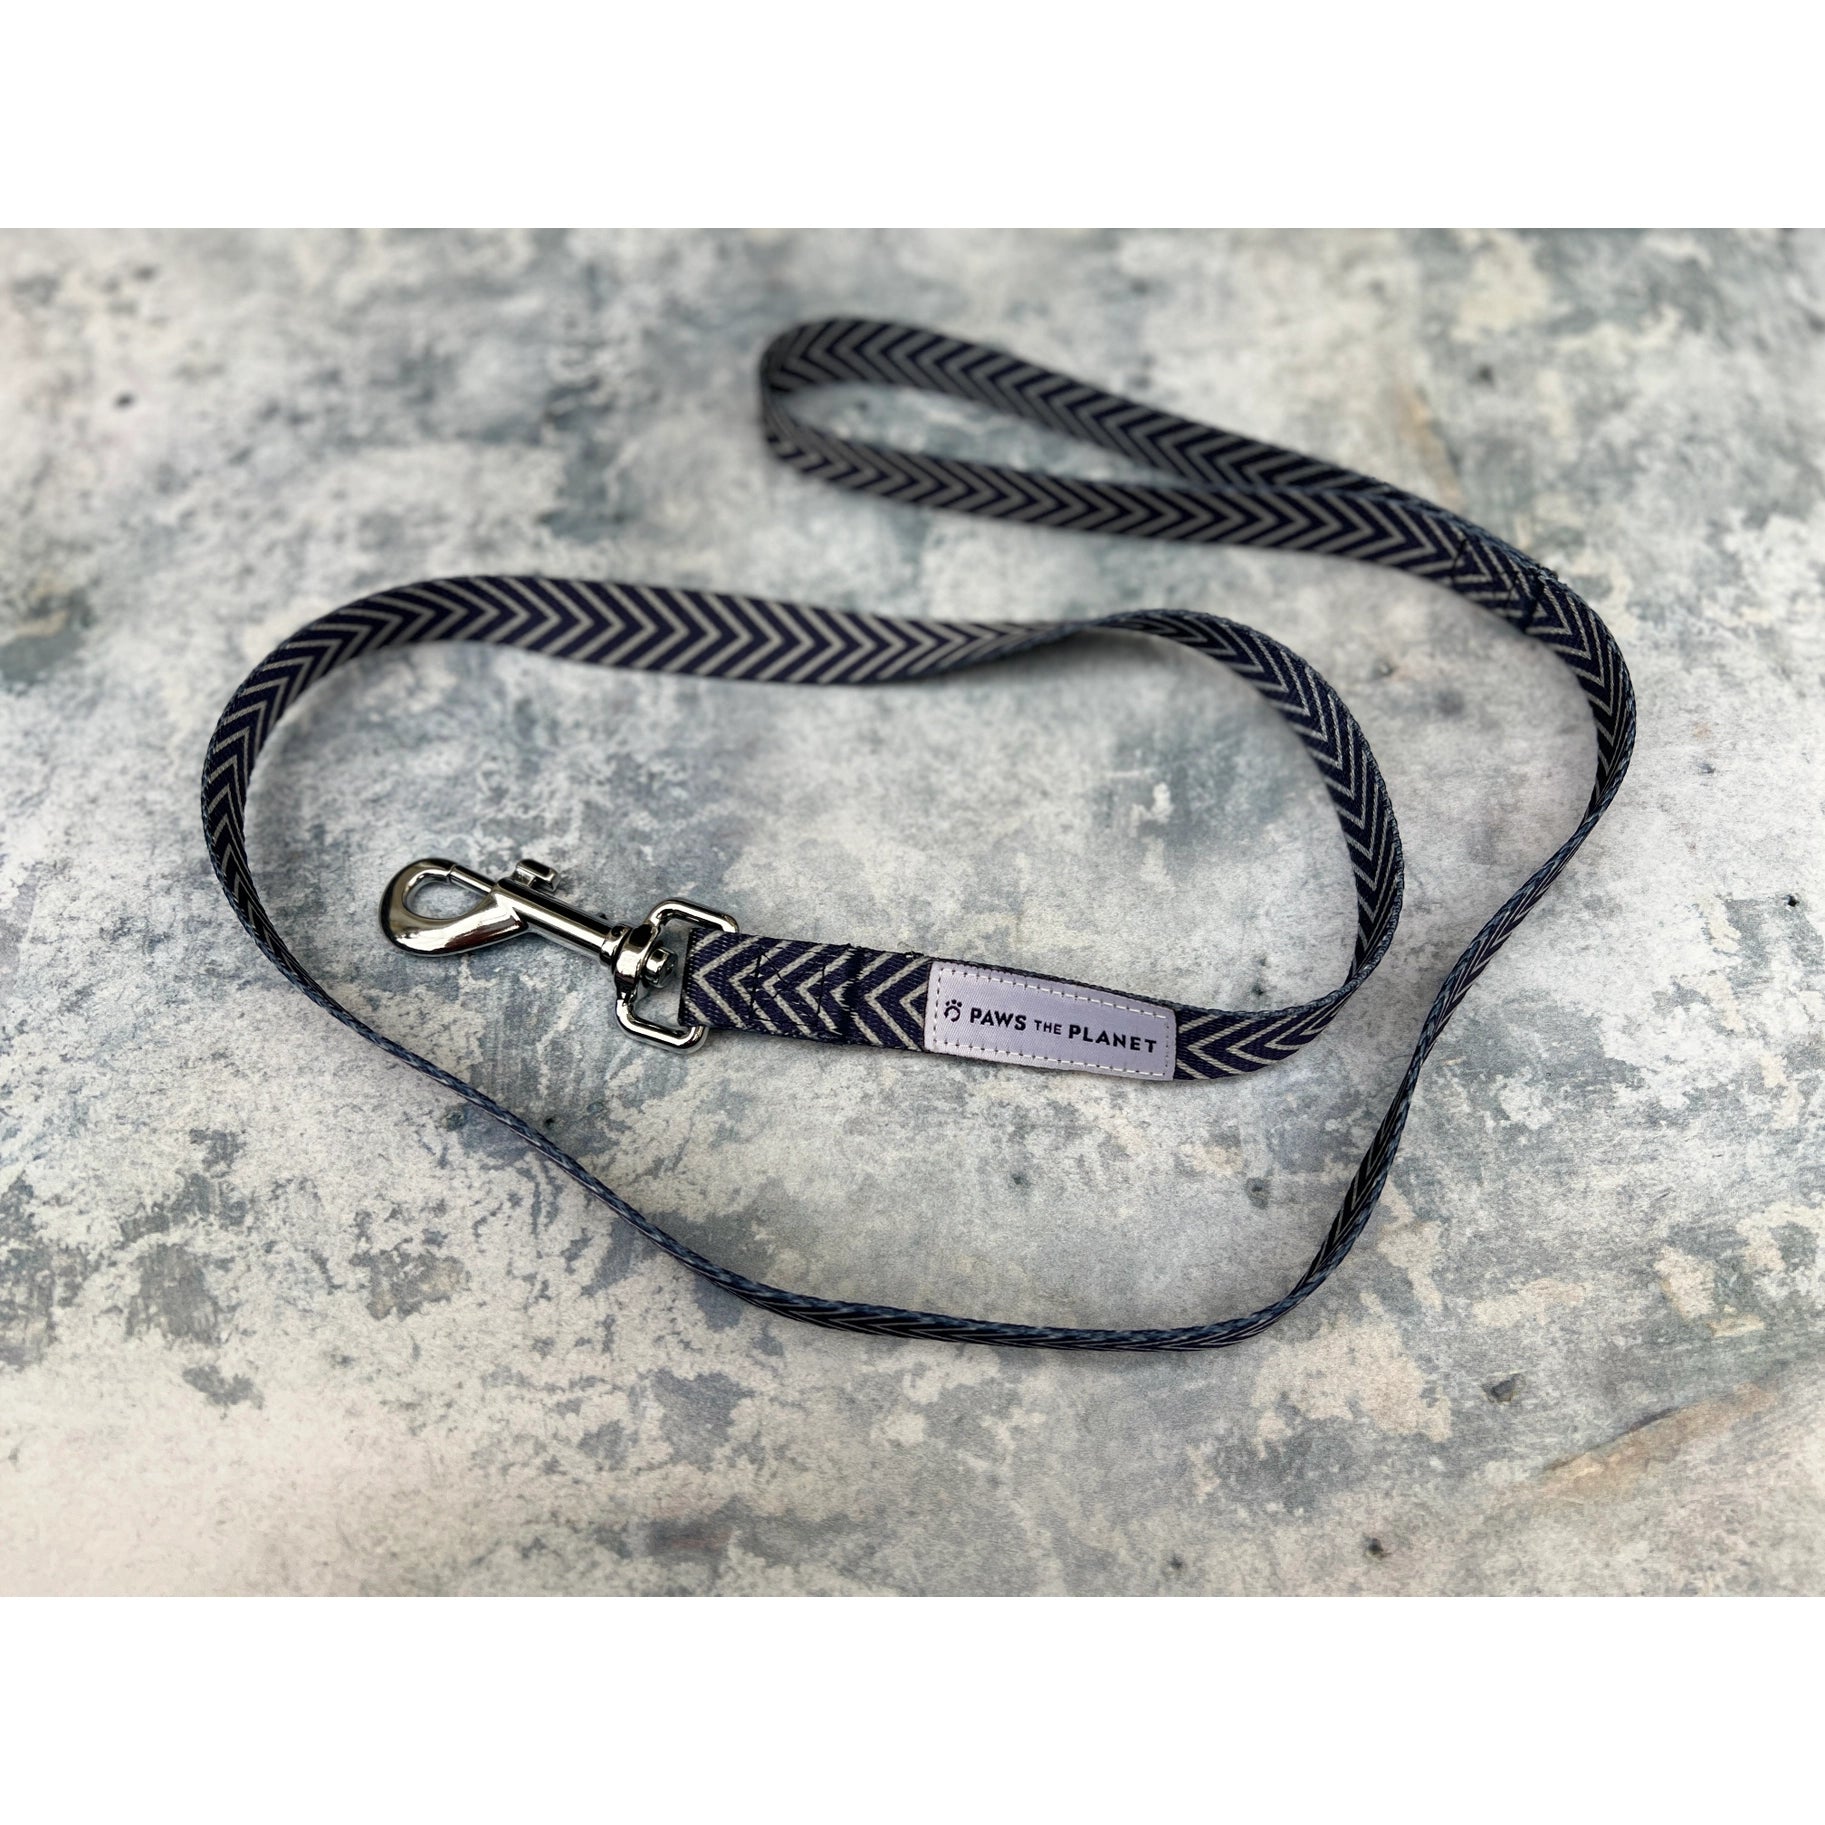 Paws the Planet - Recycled Webbing Dog Lead